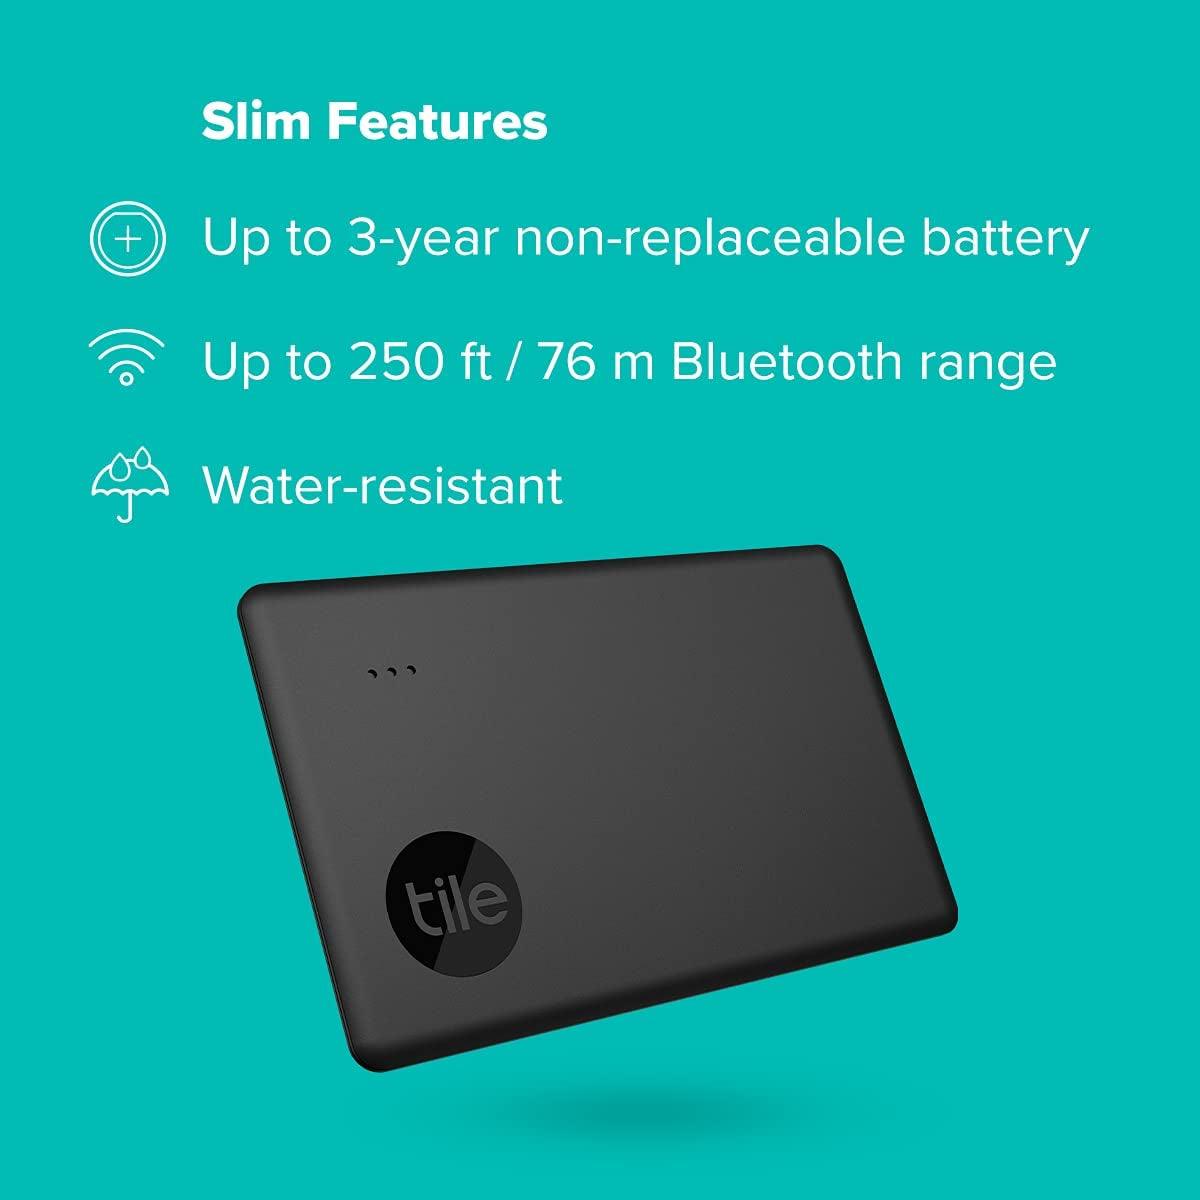 Slim 1-Pack. Thin Bluetooth Tracker, Wallet Finder and Item Locator for Wallet, Luggage Tags and More; up to 250 Ft. Range. Water-Resistant. Phone Finder. Ios and Android Compatible.